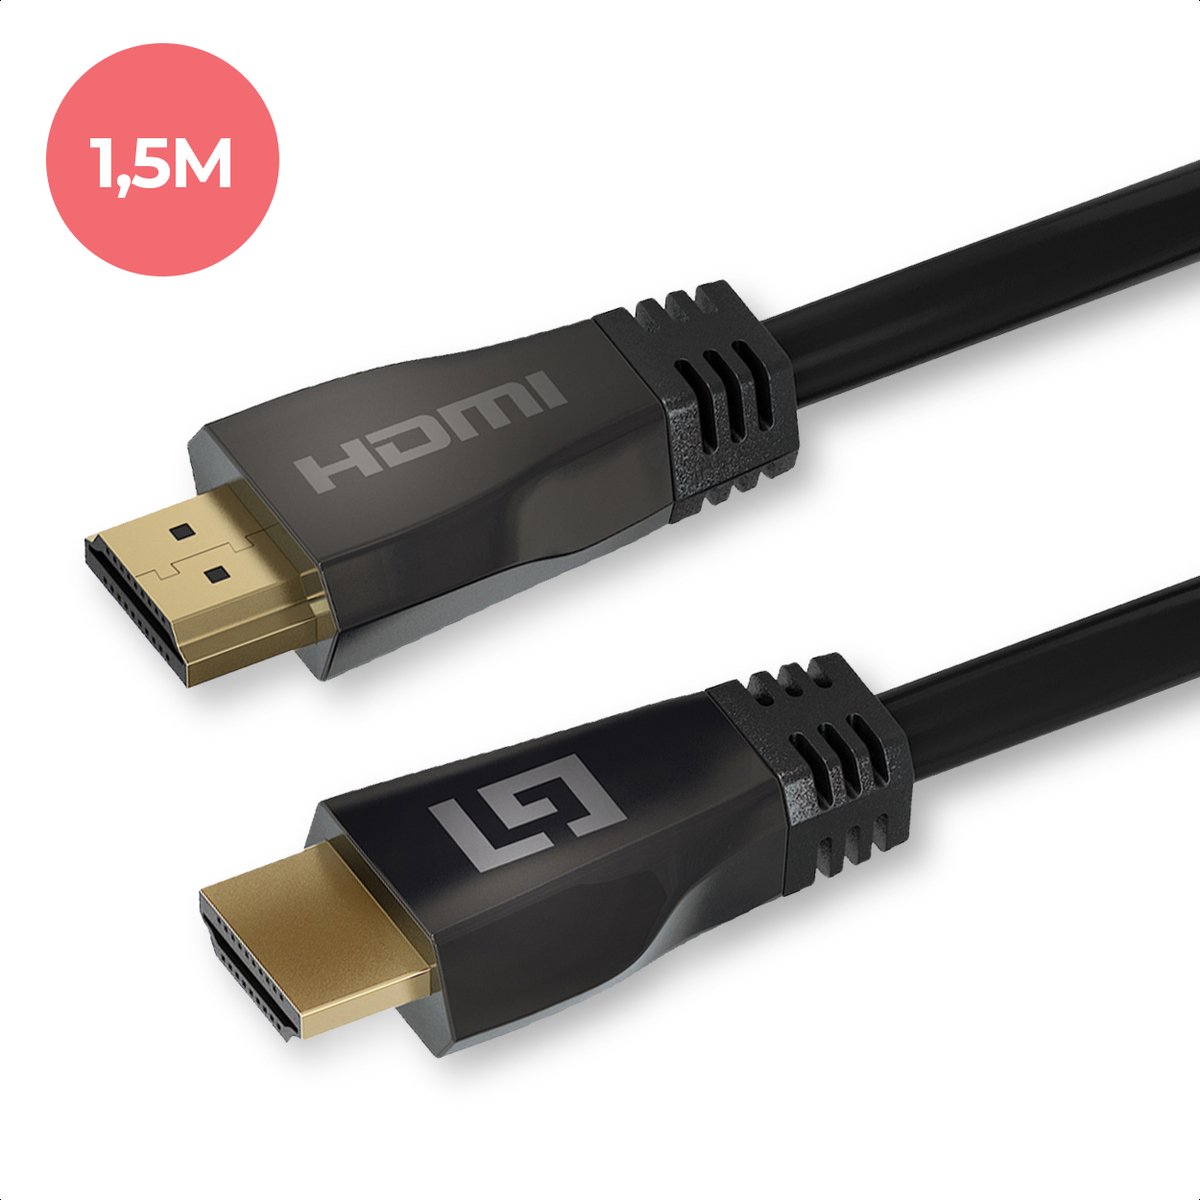 LifeGoods HDMI Ultra High Speed 2.1 Kabel - Ethernet - Male to Cable - Zwart - m | bol.com